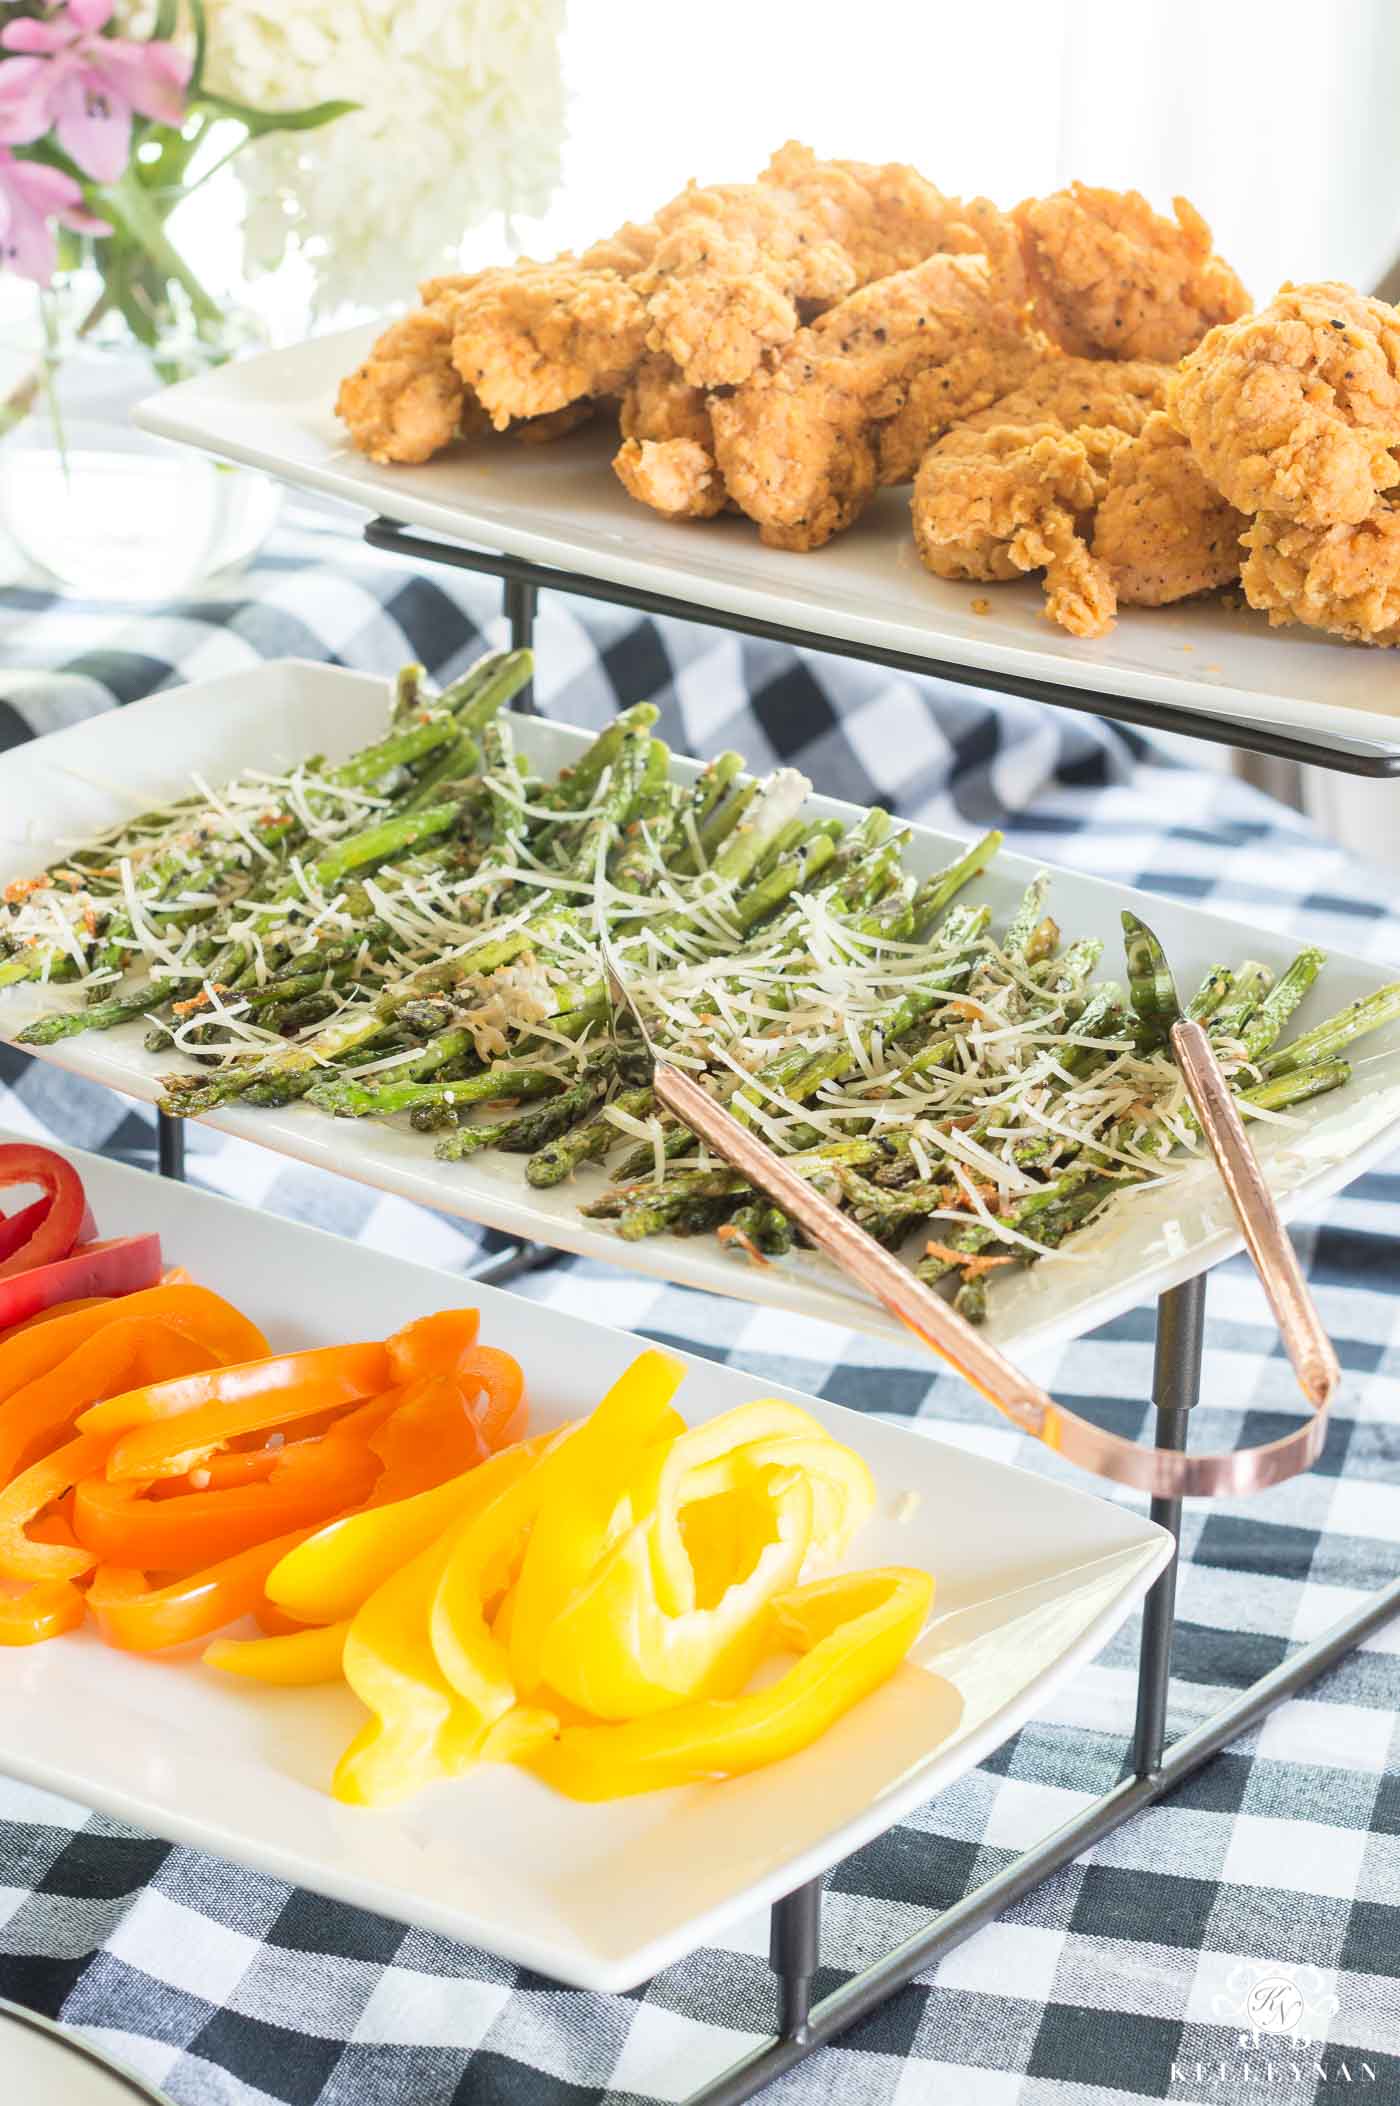 Casual summer party menu ideas with easy finger foods and appetizers